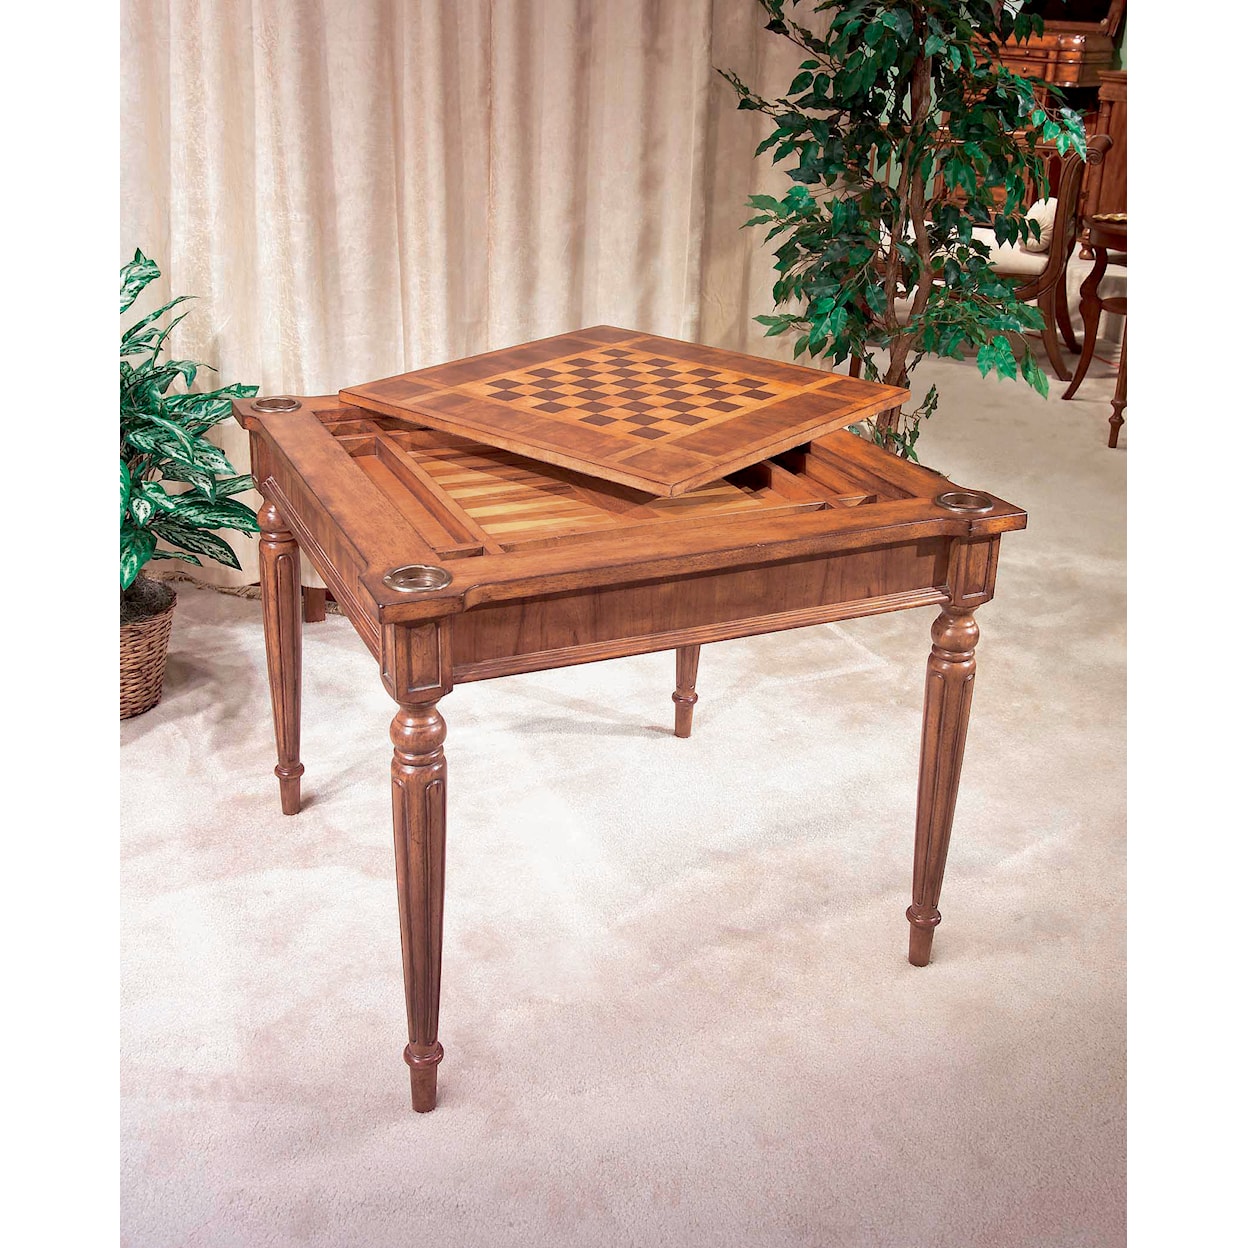 Butler Specialty Company Masterpiece  Multi-game Card Table